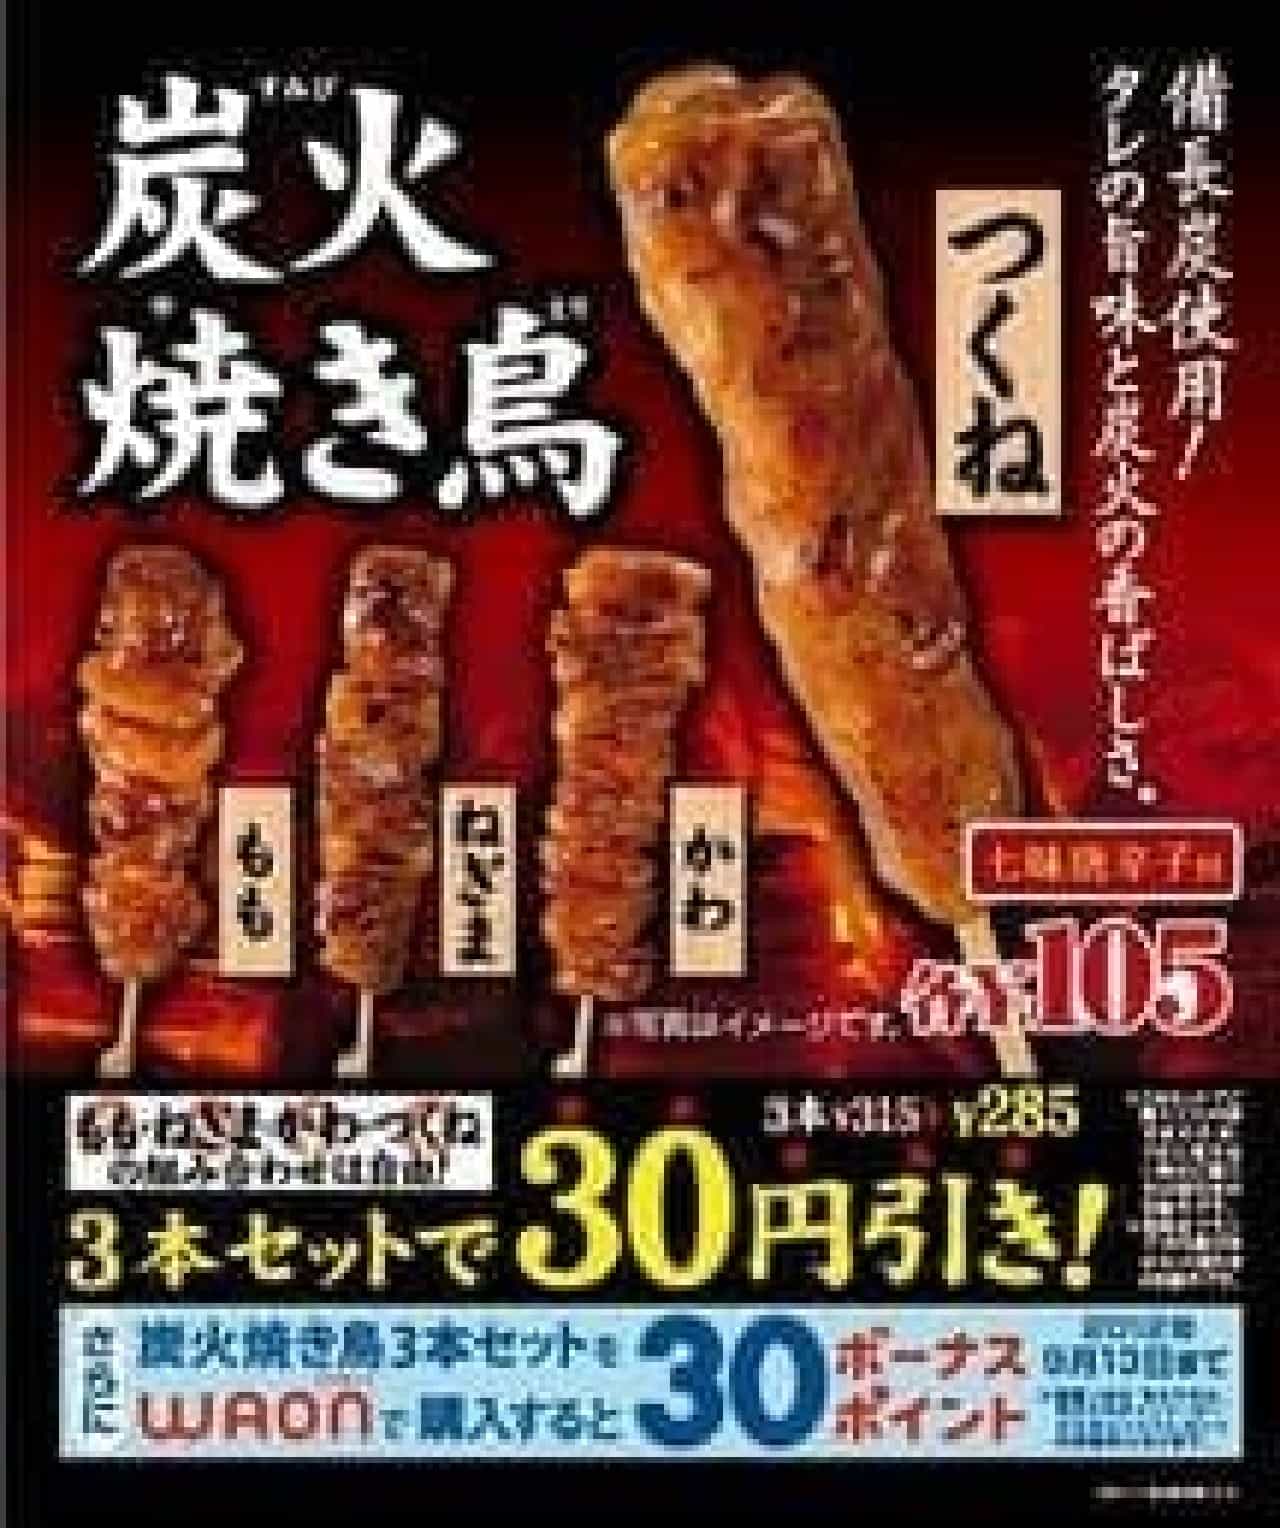 "Tsukune" appears in the "Charcoal Yakitori" series, Ministop